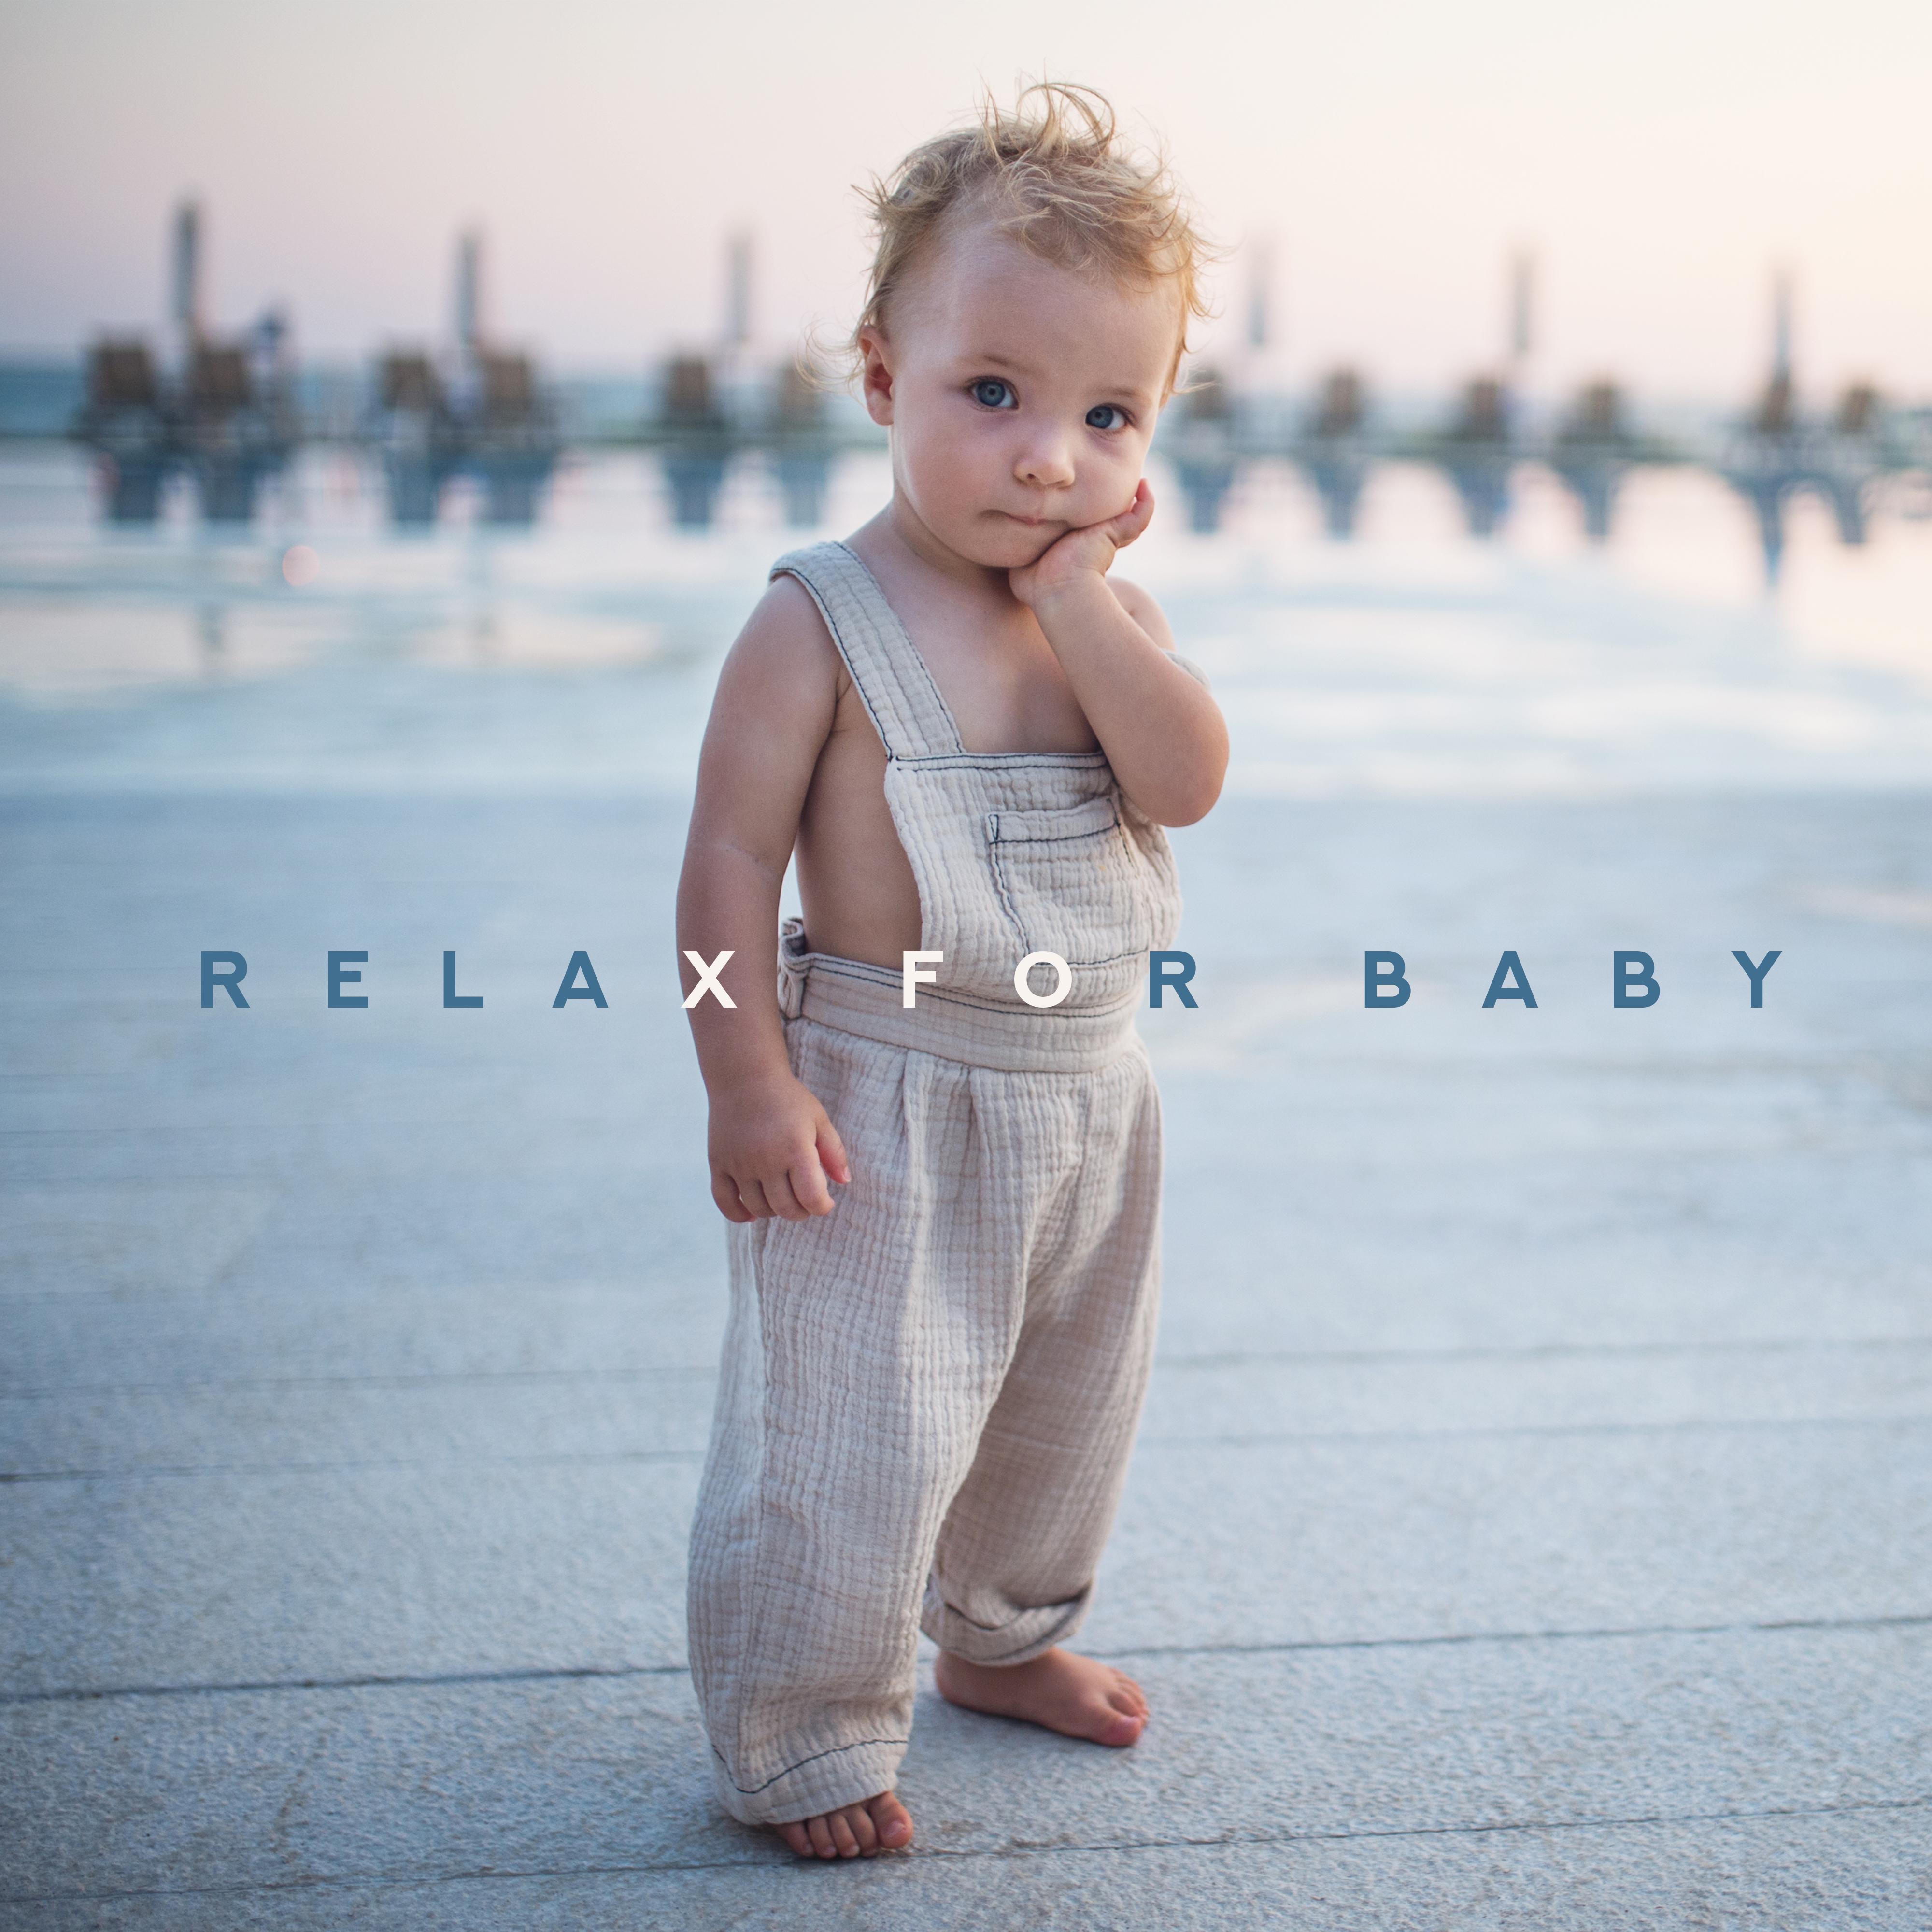 Relax for Baby – Relaxing Lullabies at Night, Toddler Music, Relaxed Baby, Deeper Sleep, Soothing Sounds for Kids, Ambient Music